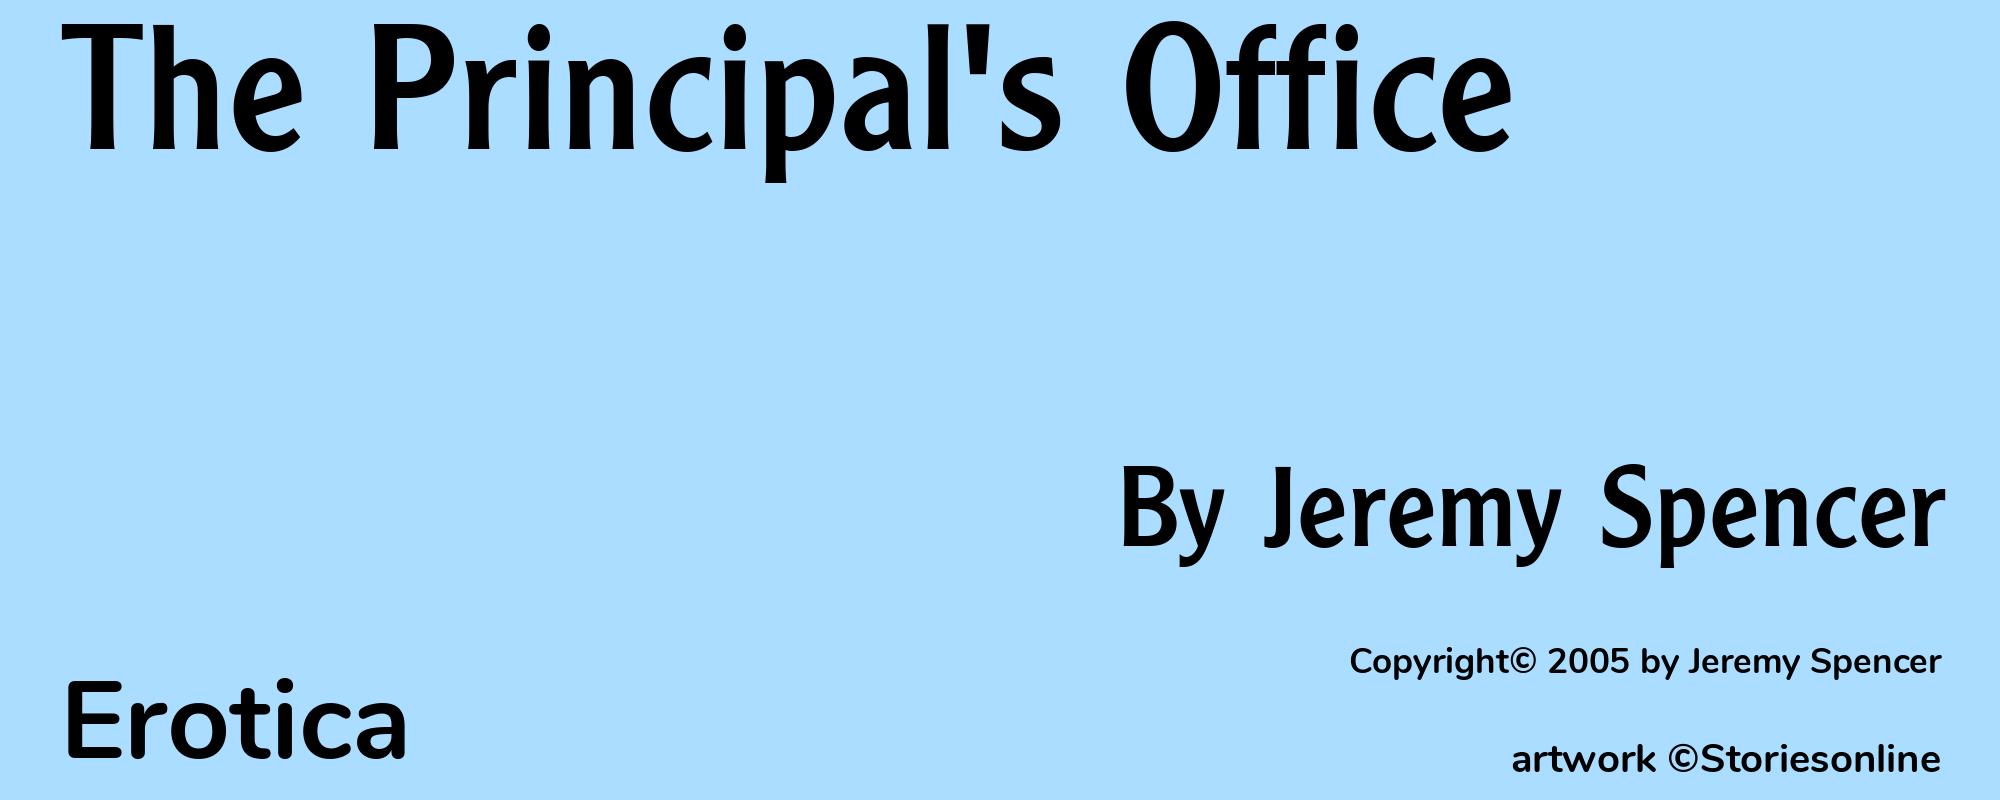 The Principal's Office - Cover